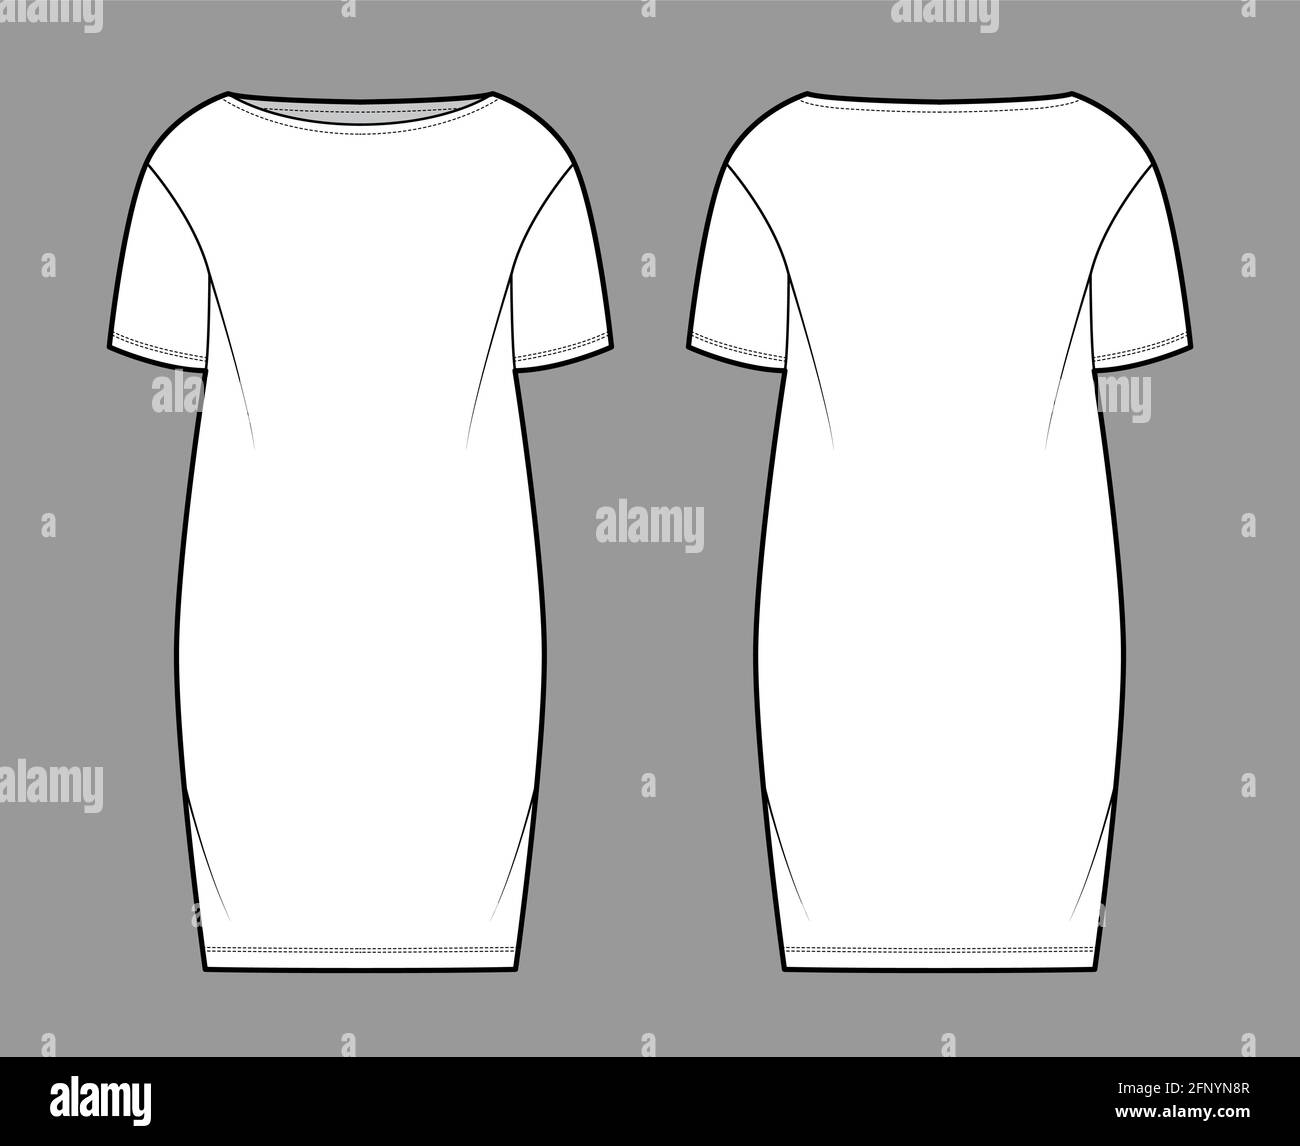 Dress sack slouchy technical fashion illustration with short sleeves ...